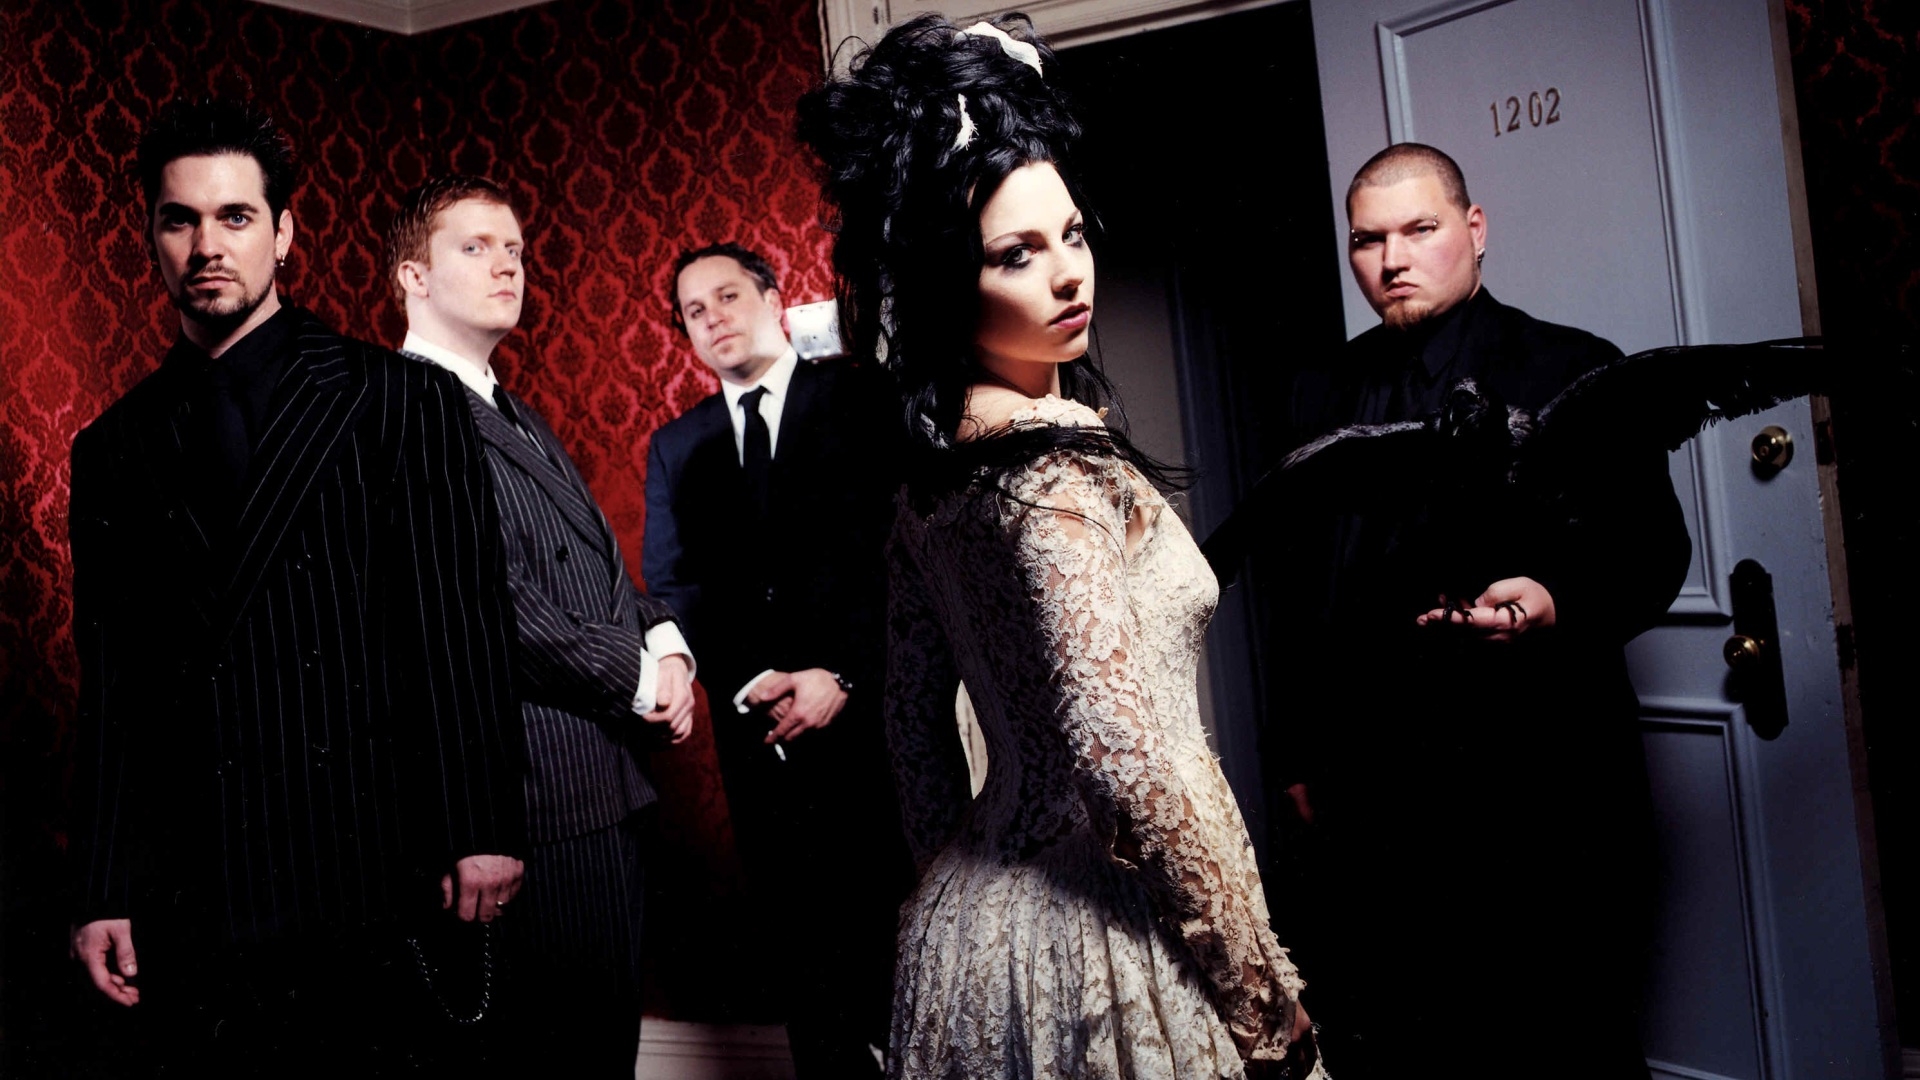 1920x1080
Keywords: anywhere but home;dvd;promo;photoshoot;evanescence;band;red